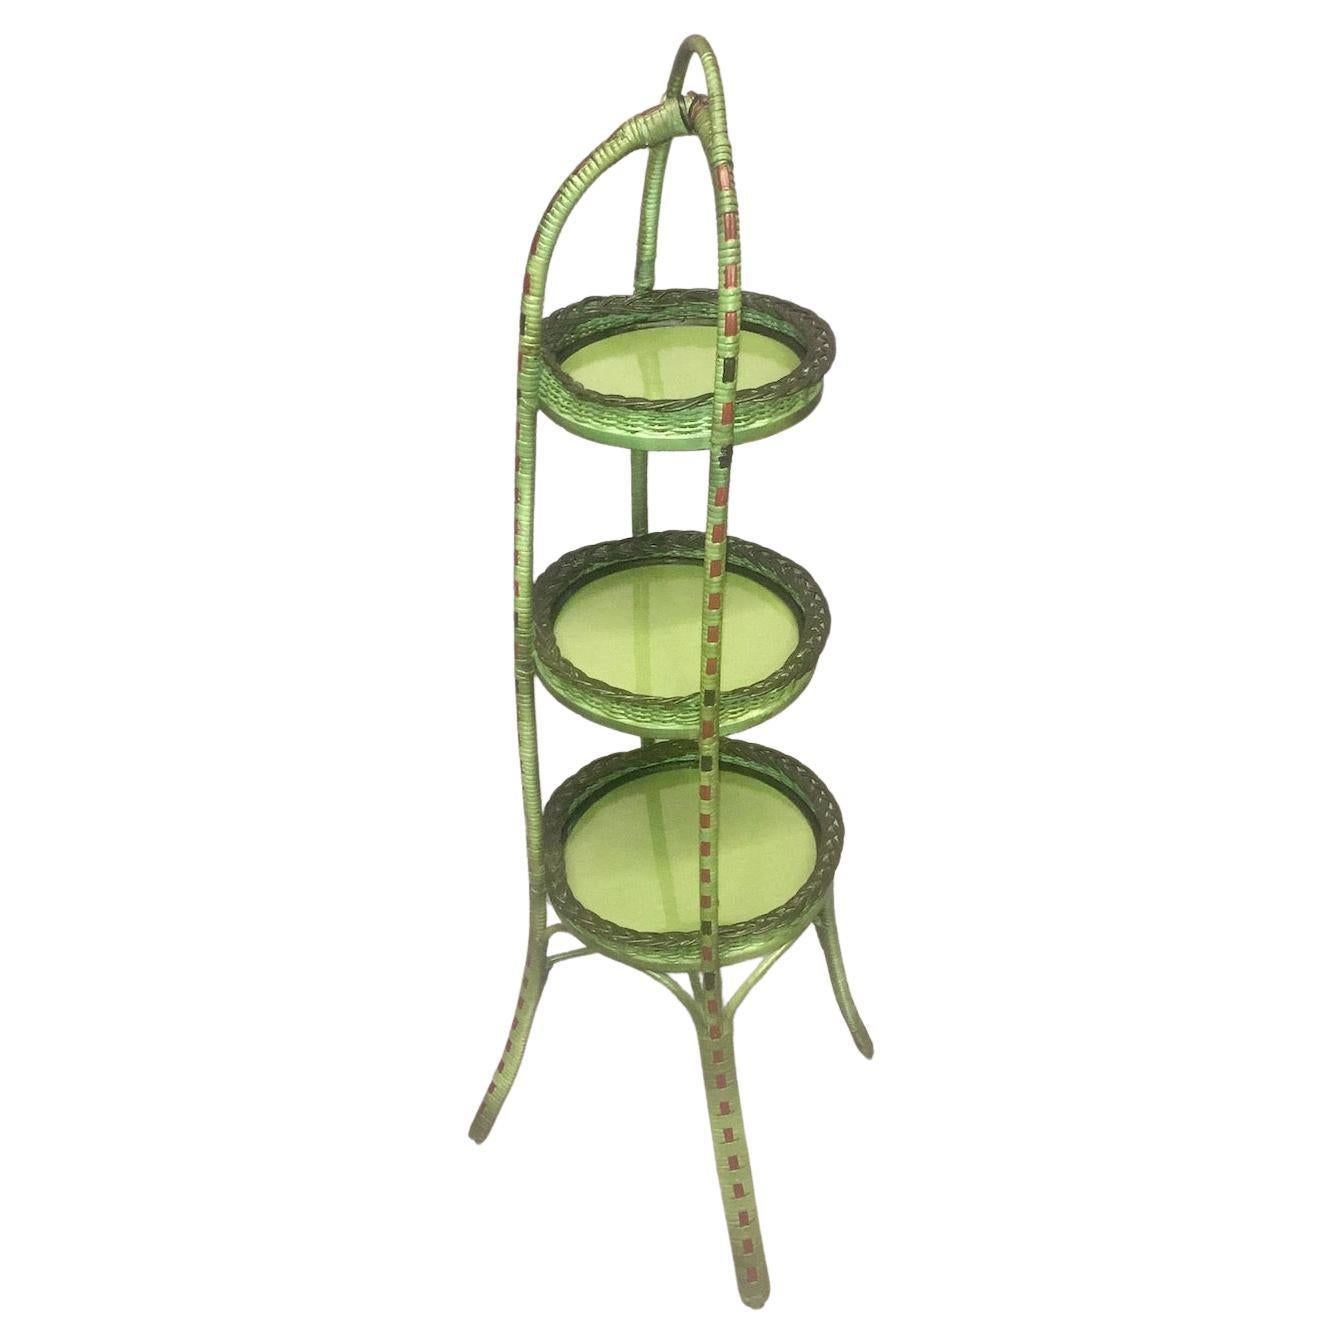 A Wicker Pie / Hors- d'oeuvres Server in French Green Finish For Sale